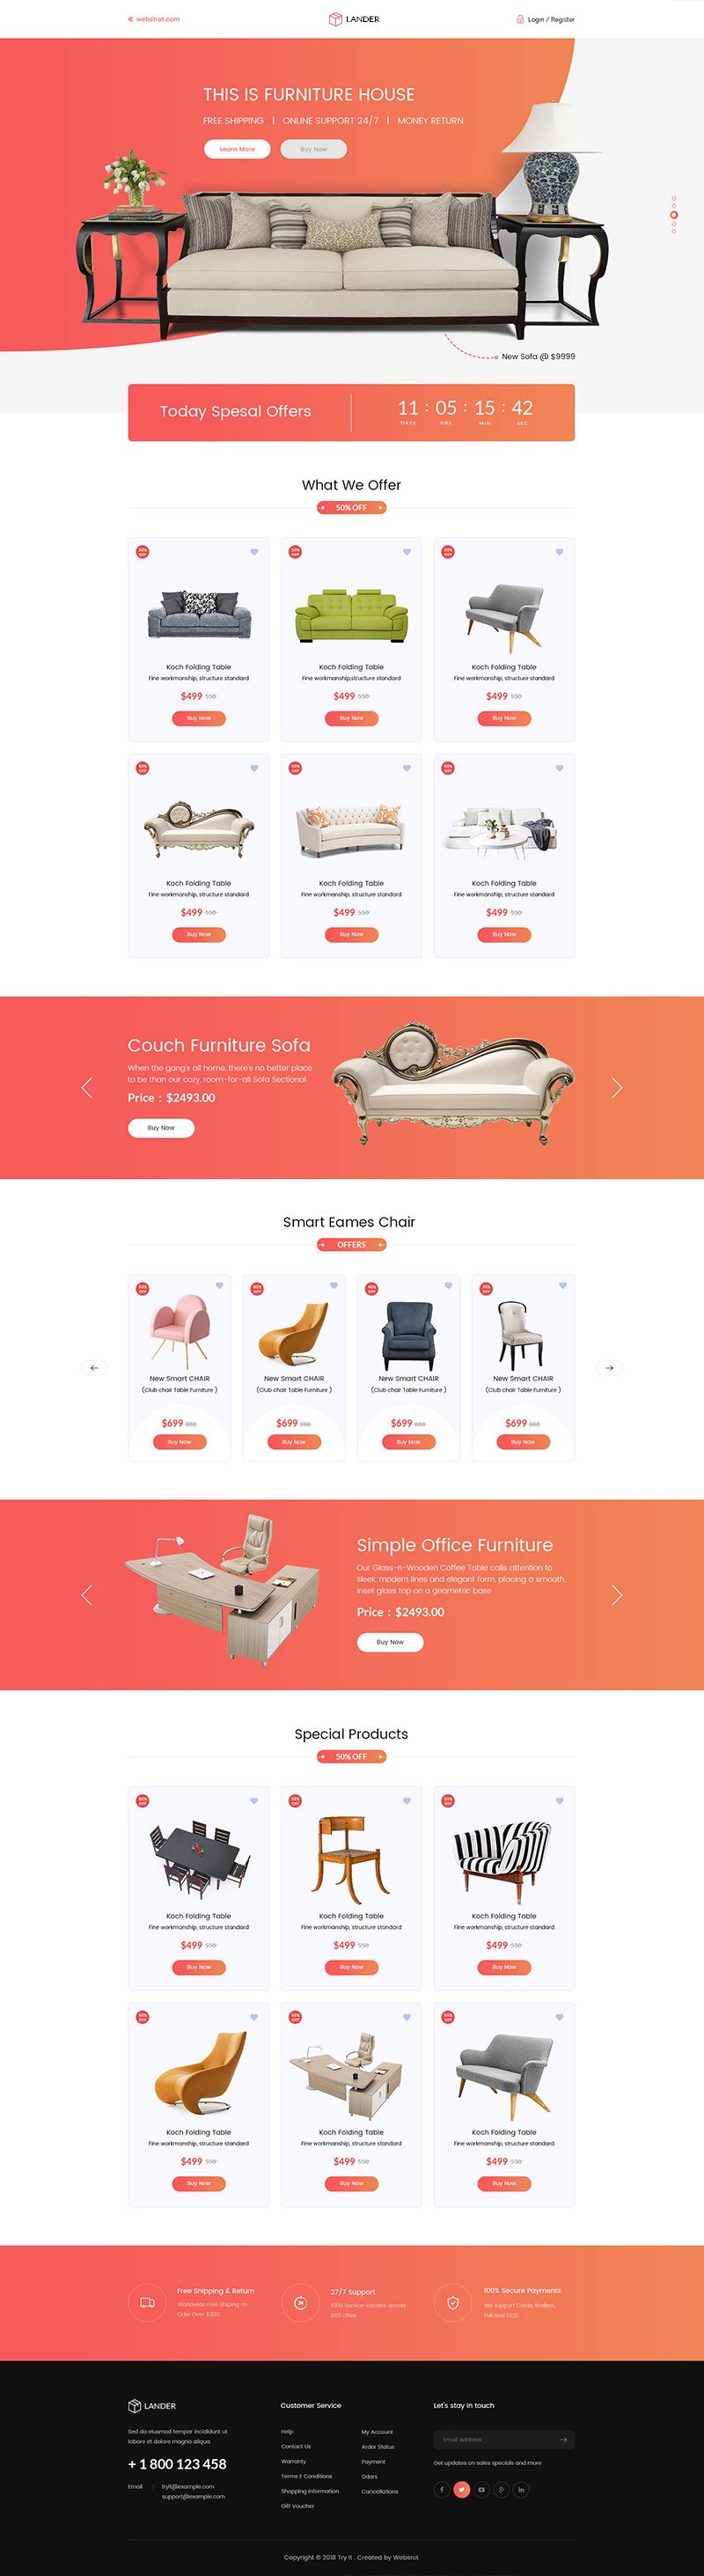 Tryit - Product Offer Landing Page